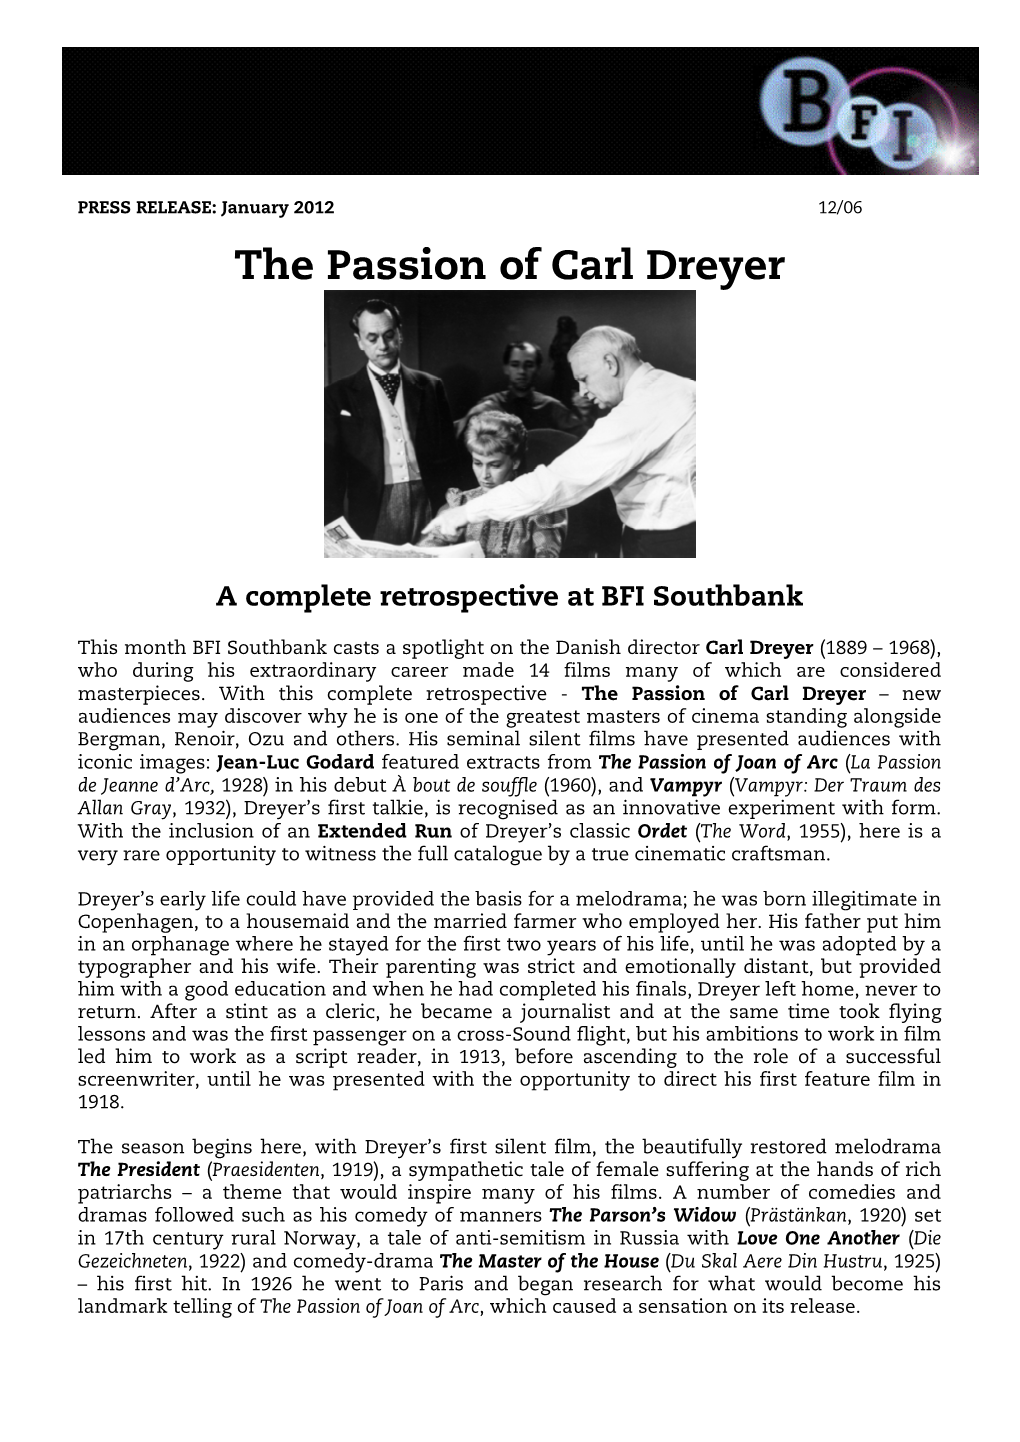 The Passion of Carl Dreyer